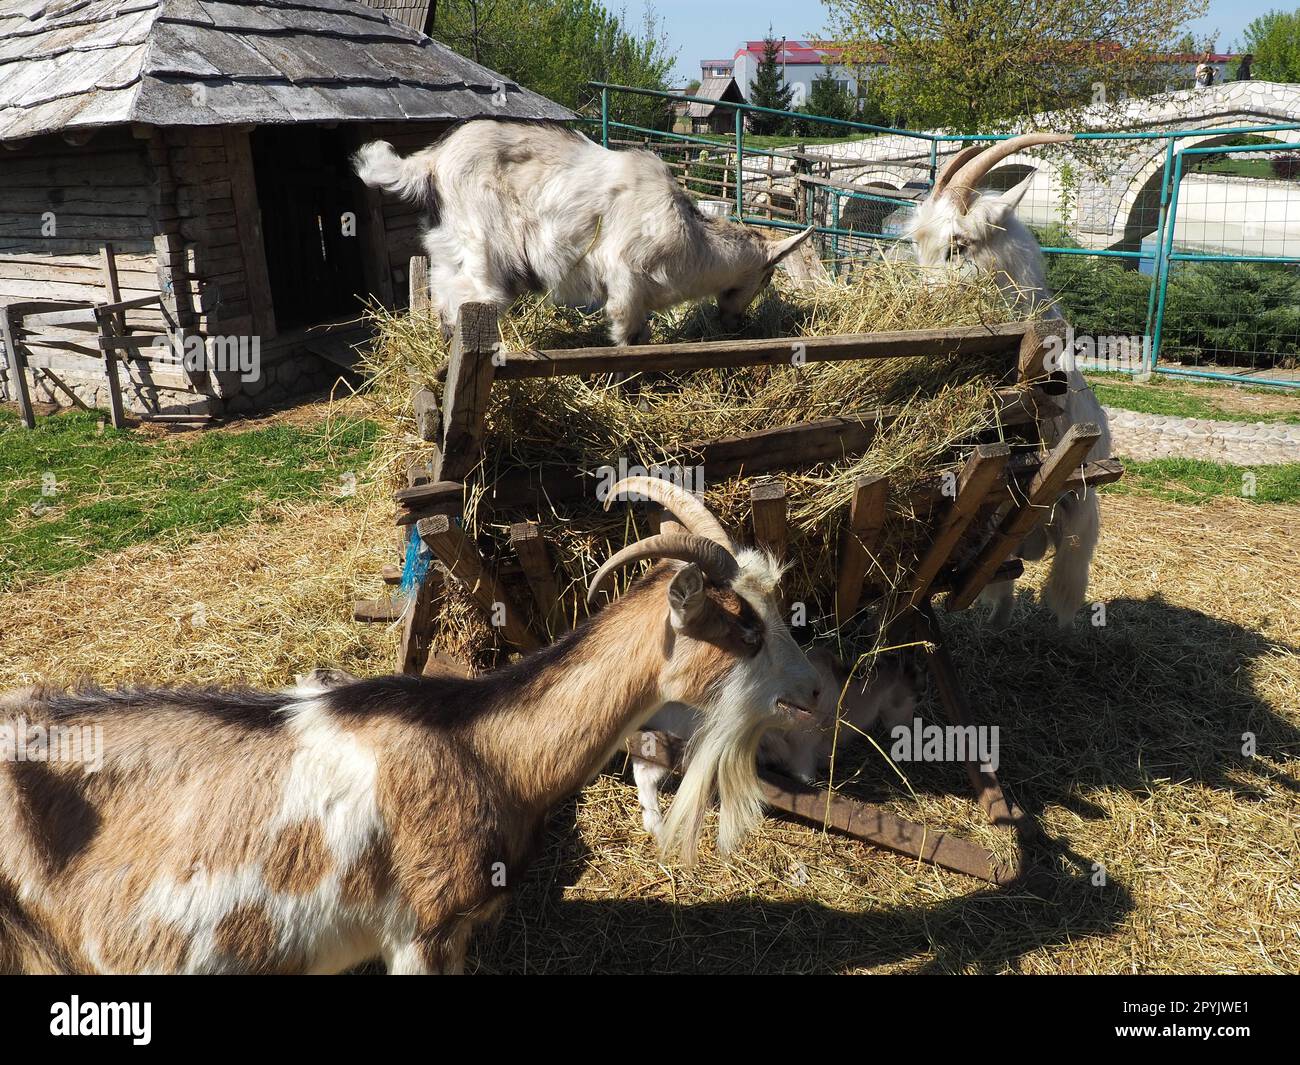 Stanisici, Bijelina, Bosnia and Herzegovina, 25 April 2021. The domestic goat is Capra hircus, a species of artiodactyls from the genus Capra mountain goats of the bovine family. Stock Photo